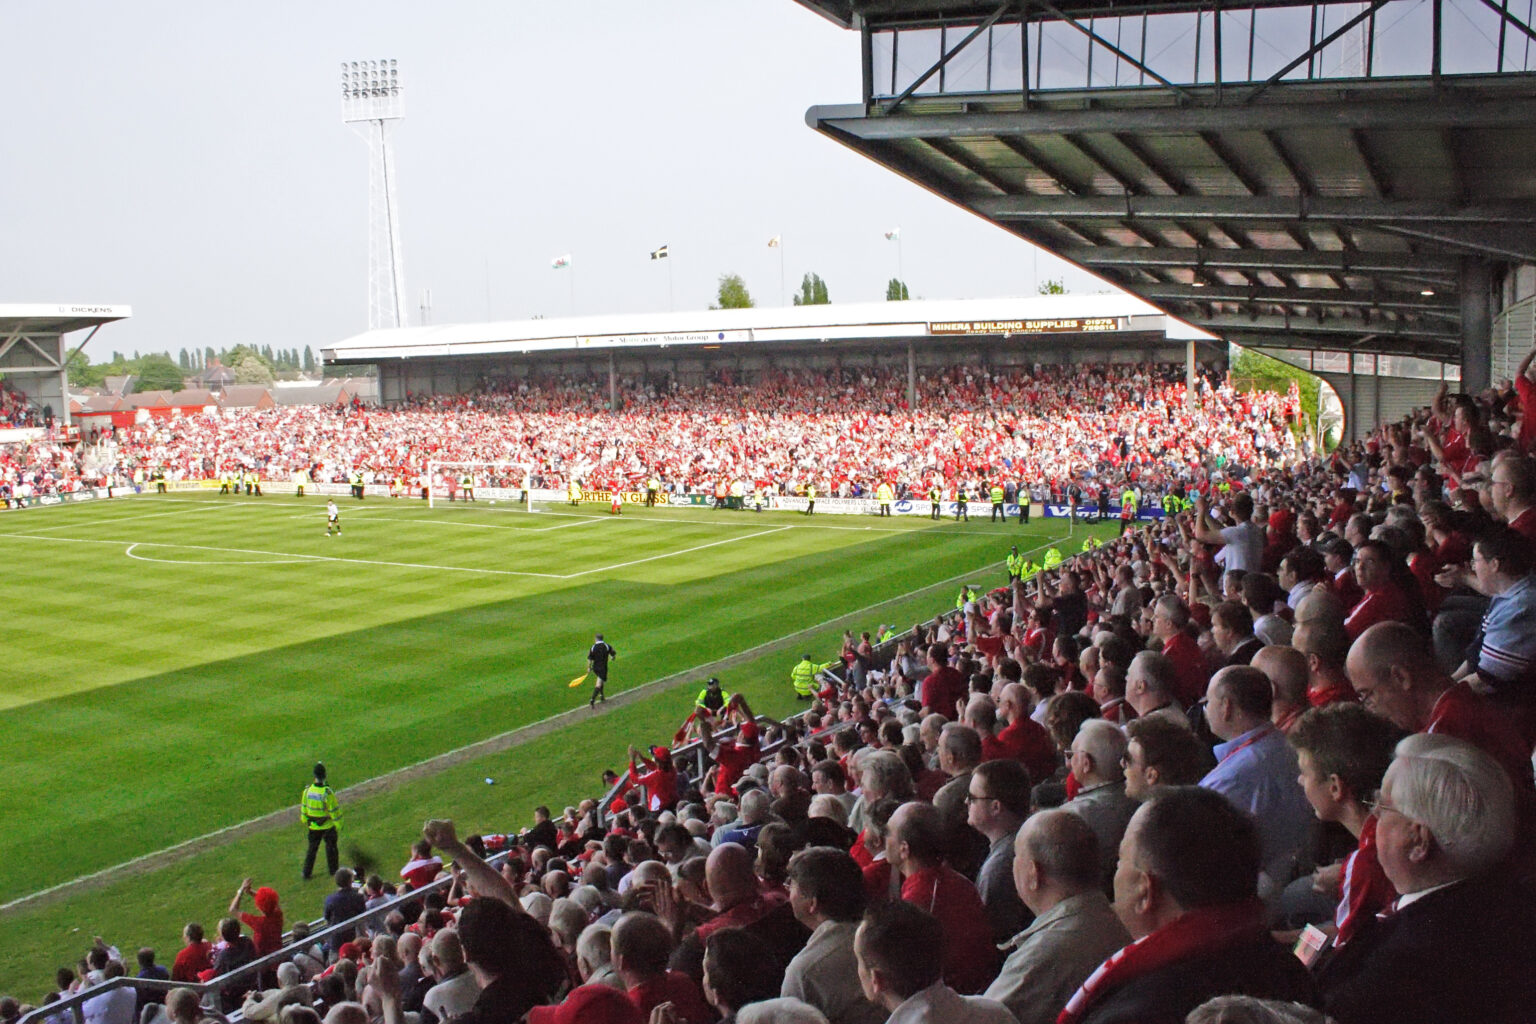 AFL Architects to work with Wrexham AFC on stadium redevelopment plans